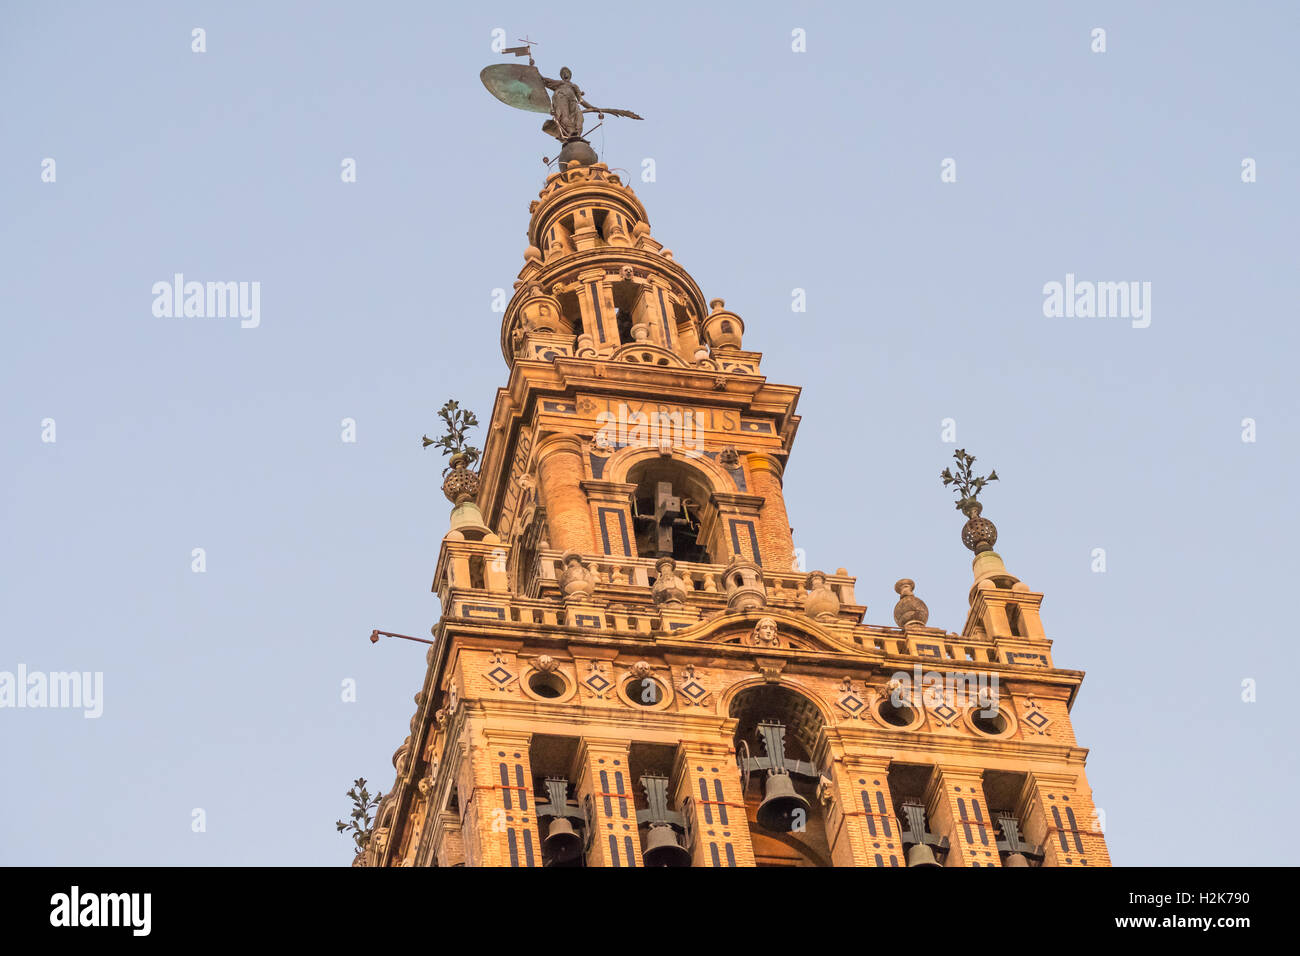 Cathedral bell, tower, La Giralda, Seville, Spain. Stock Photo